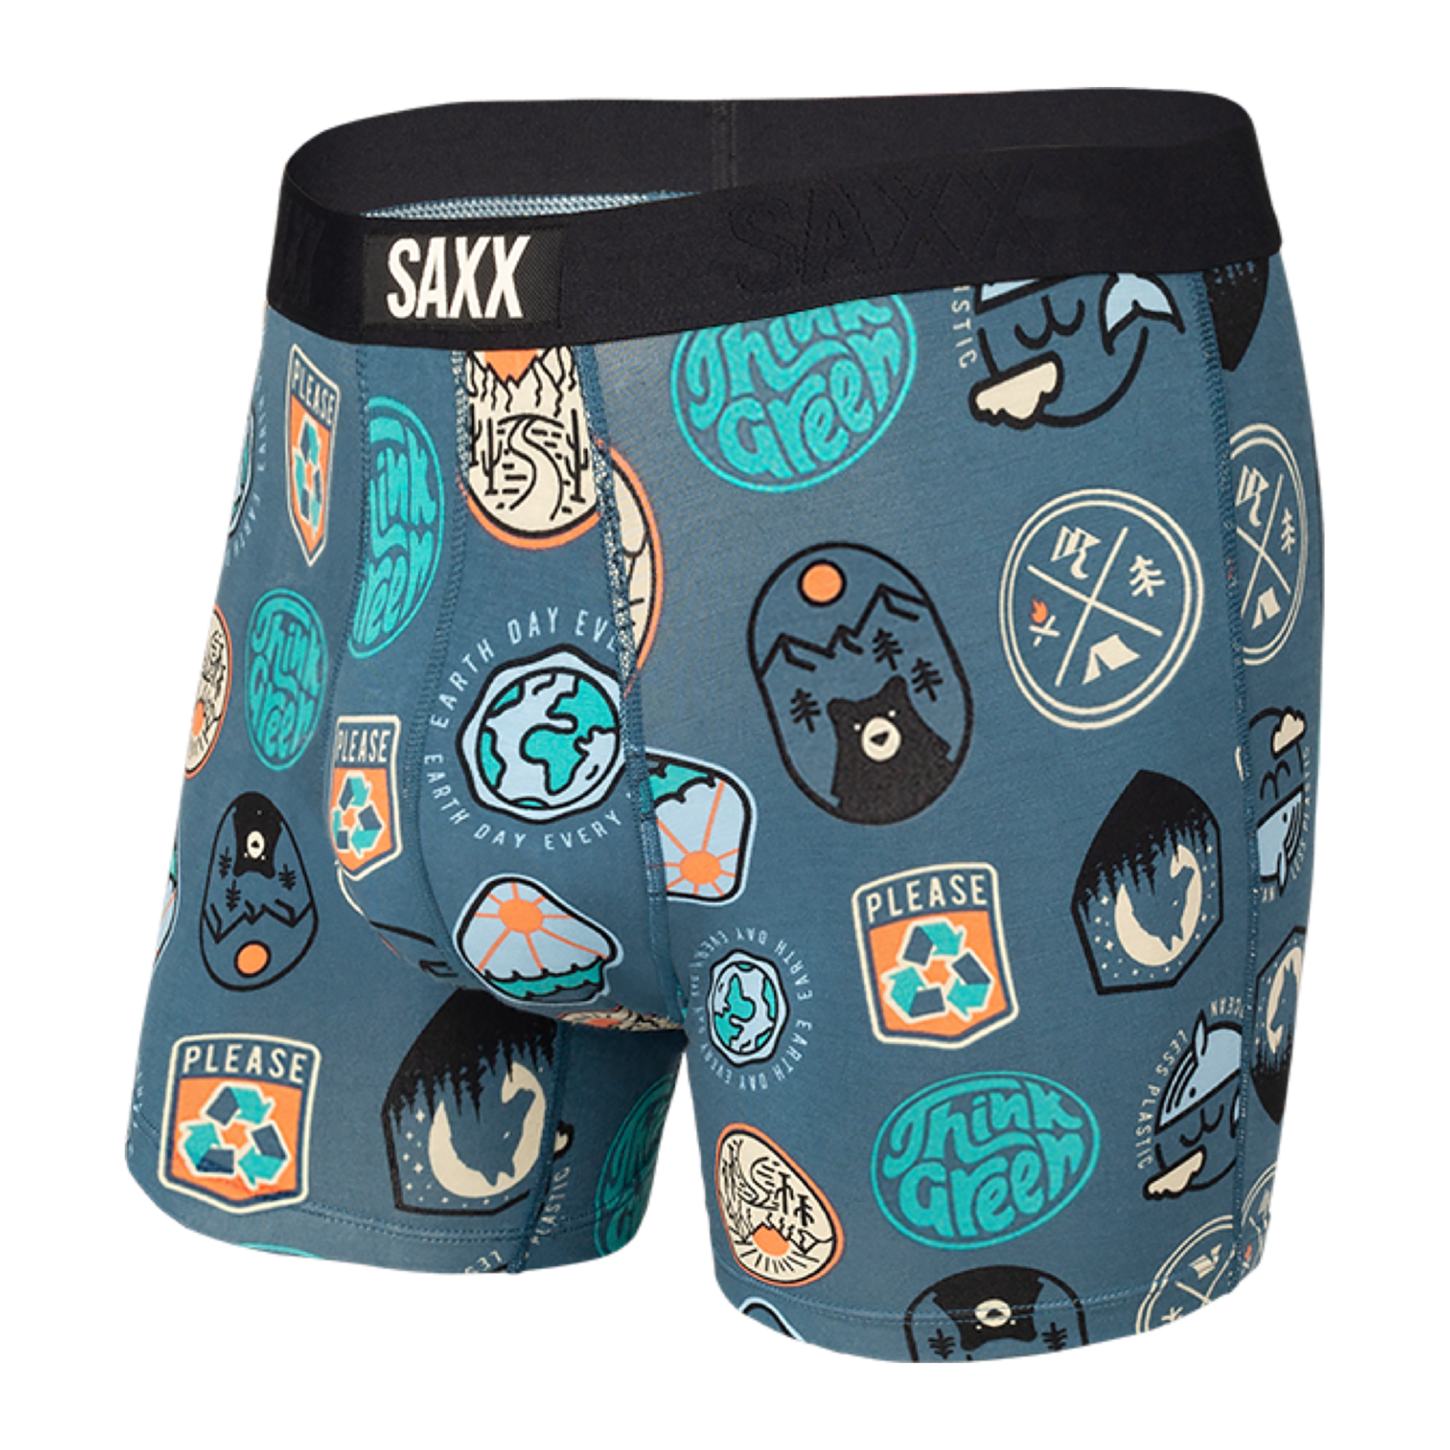 Saxx Vibe Boxer Brief - Navy Everyday Is Earth Day